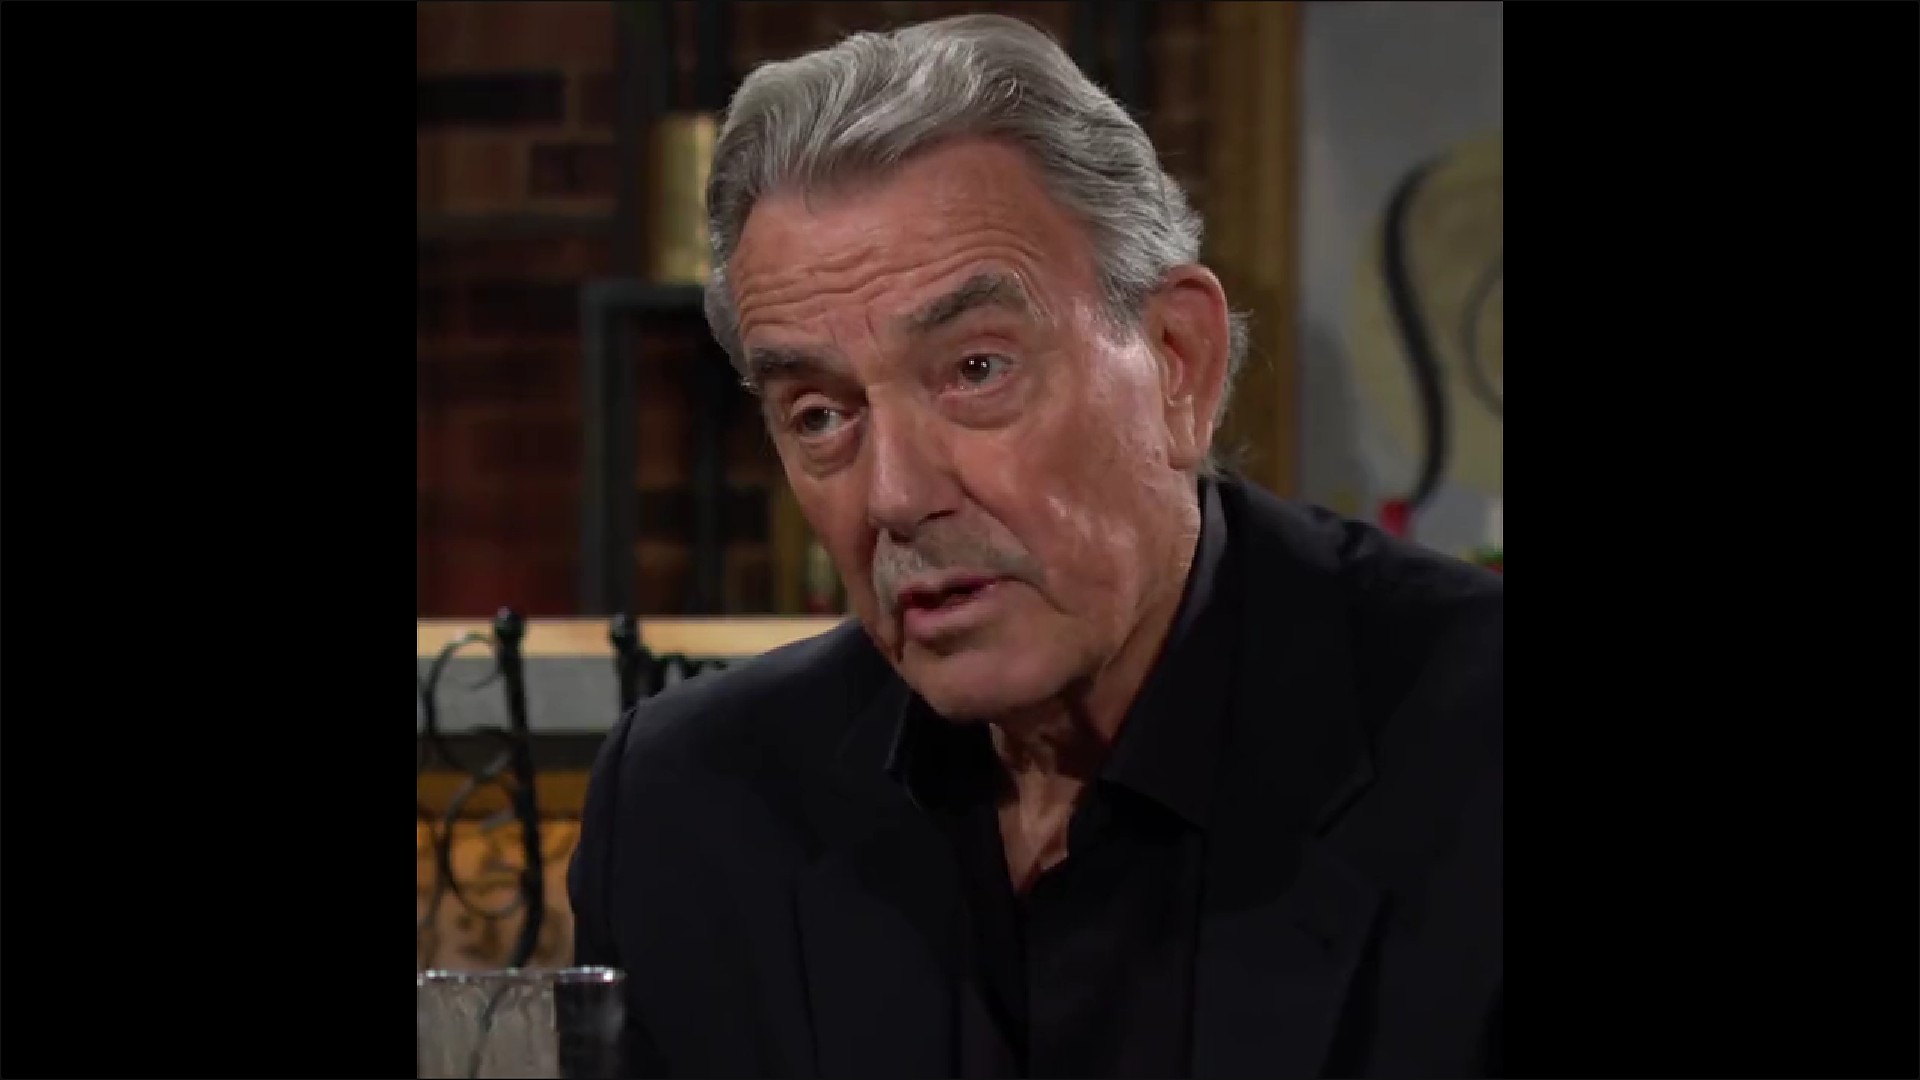 Y&R/Victor (Eric Braeden) delivers warning to Nick to stay away from Sally